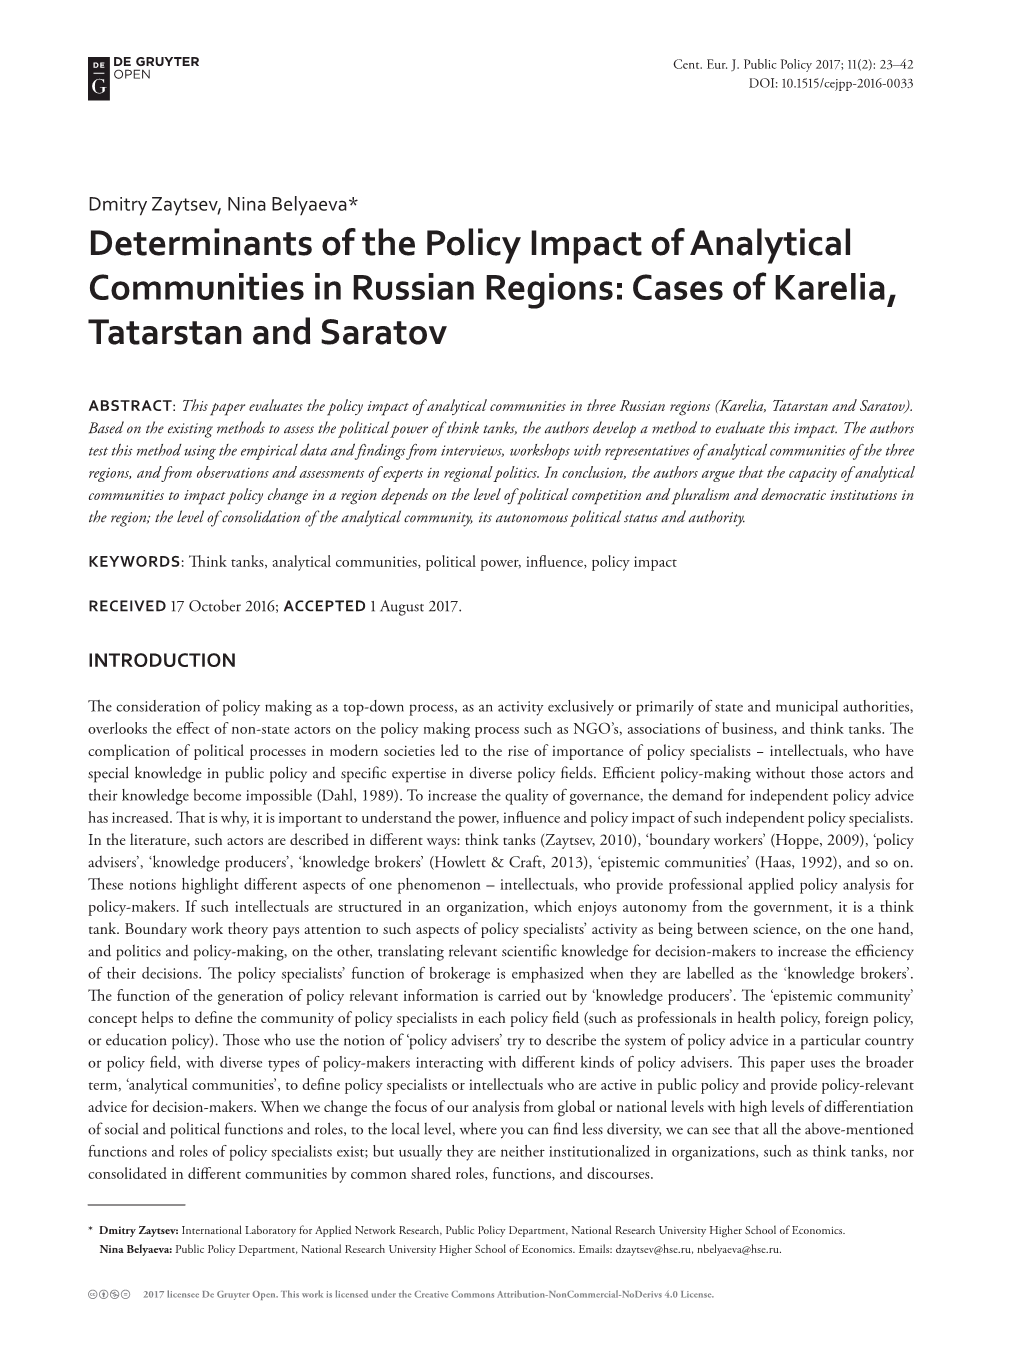 Determinants of the Policy Impact of Analytical Communities in Russian Regions: Cases of Karelia, Tatarstan and Saratov